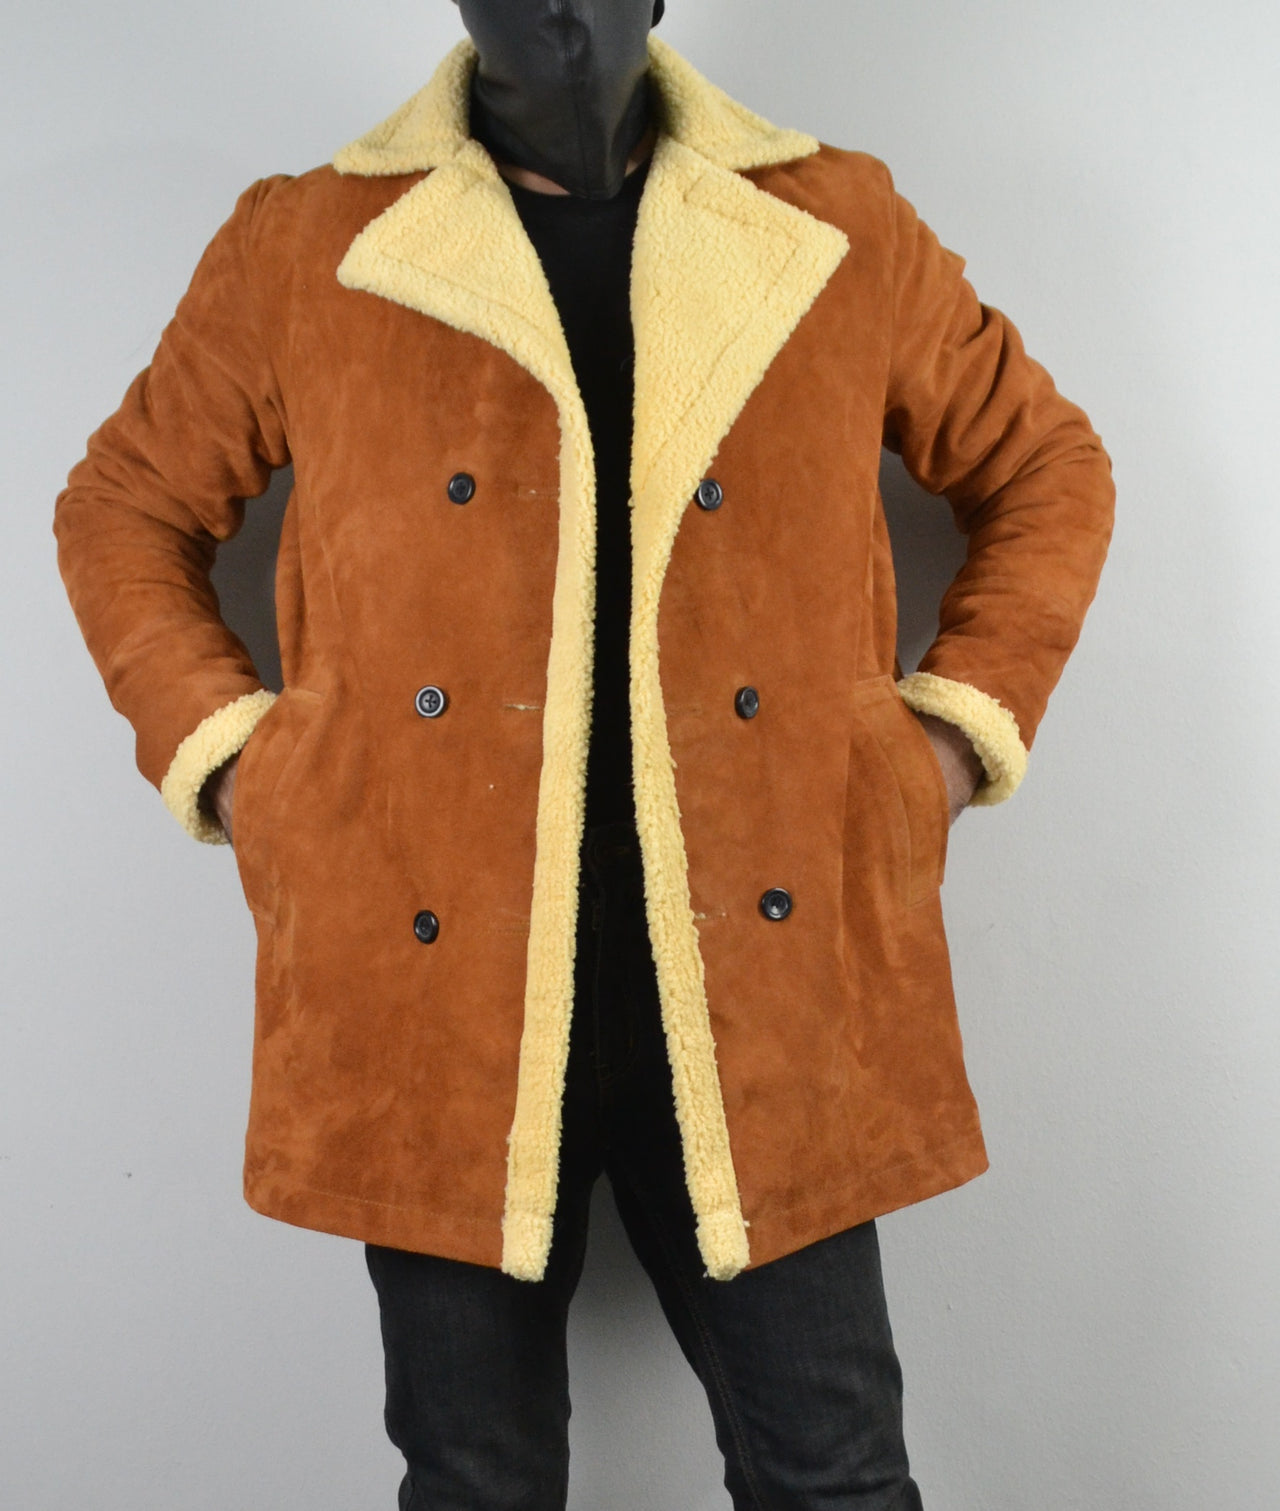 Men's Double Breasted Shearling Fur Suede Tan Leather Jacket